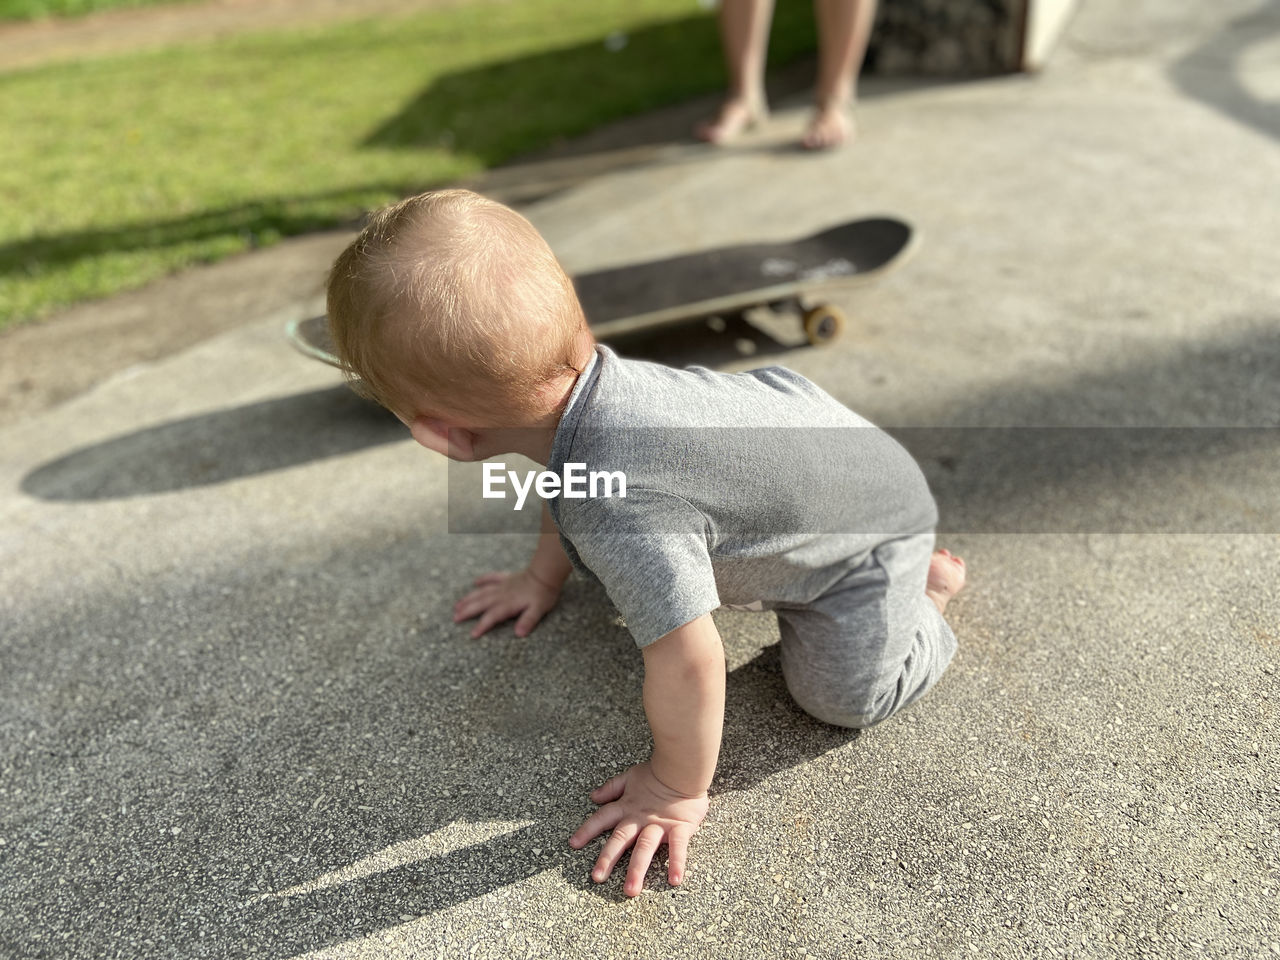 Blonde child, baby in a gray outfit crawling next to a skateboard